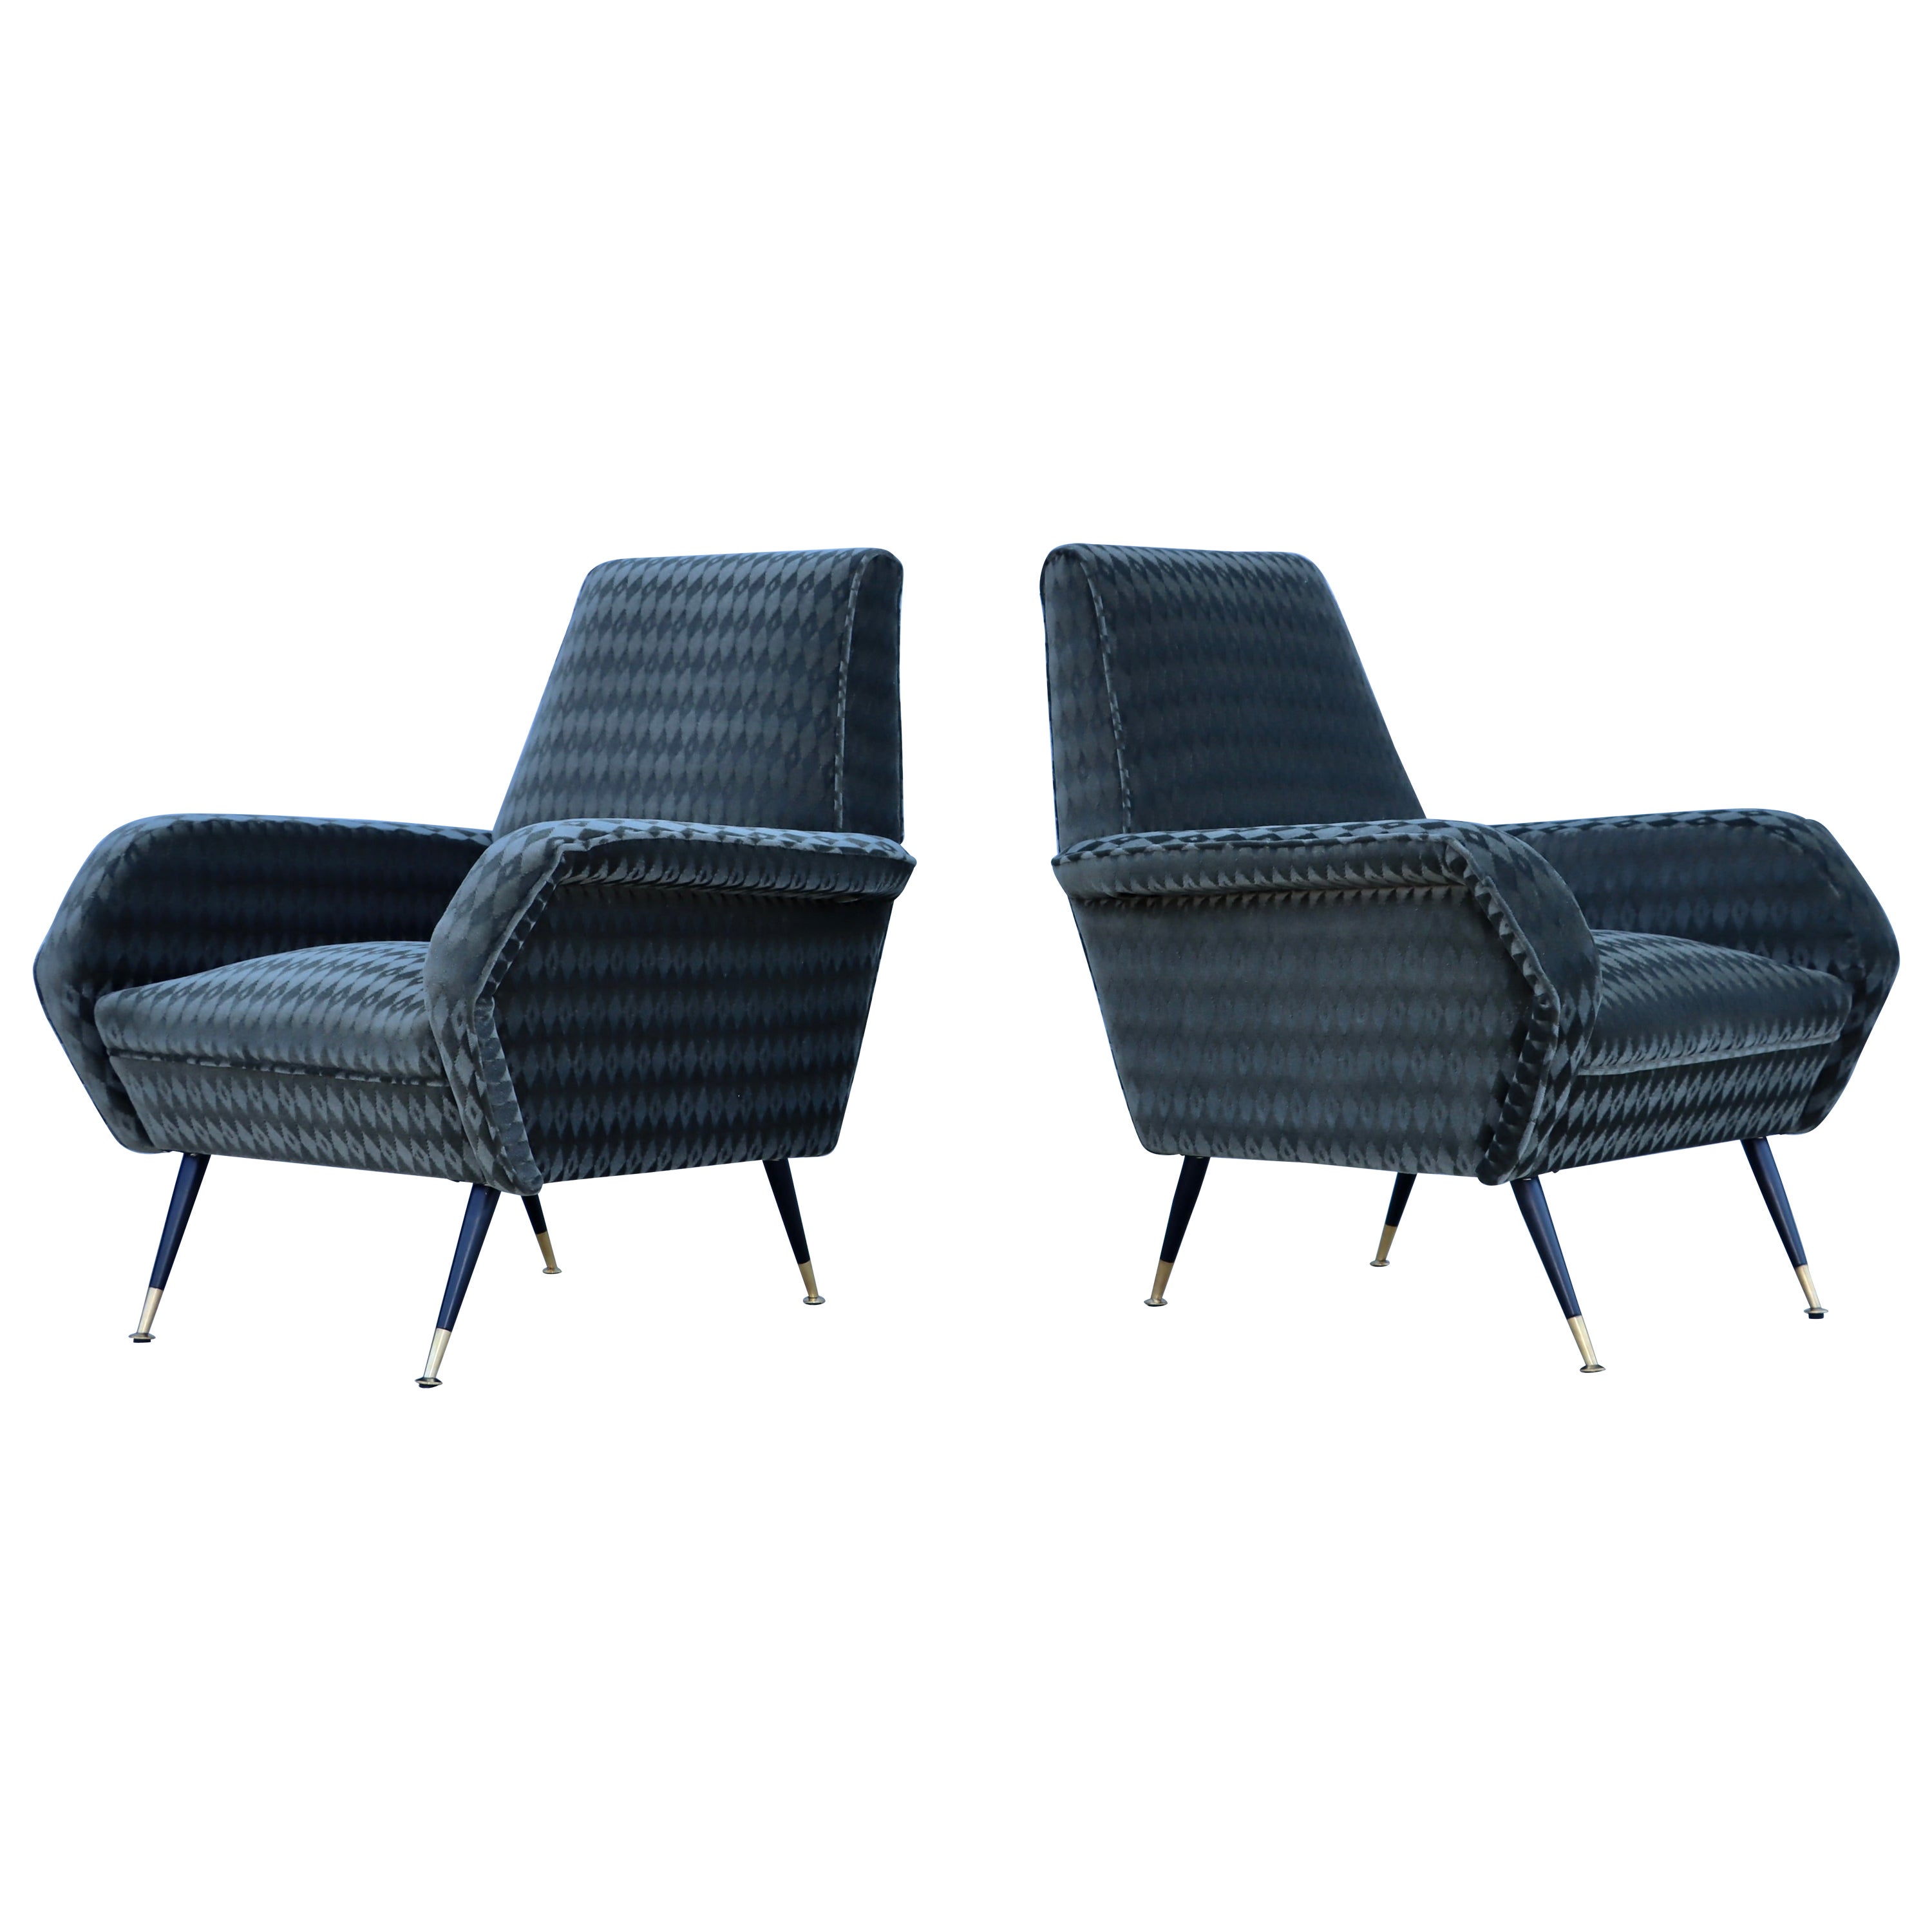 1950's Mid-Century Modern Italian Lounge Chairs mit Donghia Mohair Polsterung